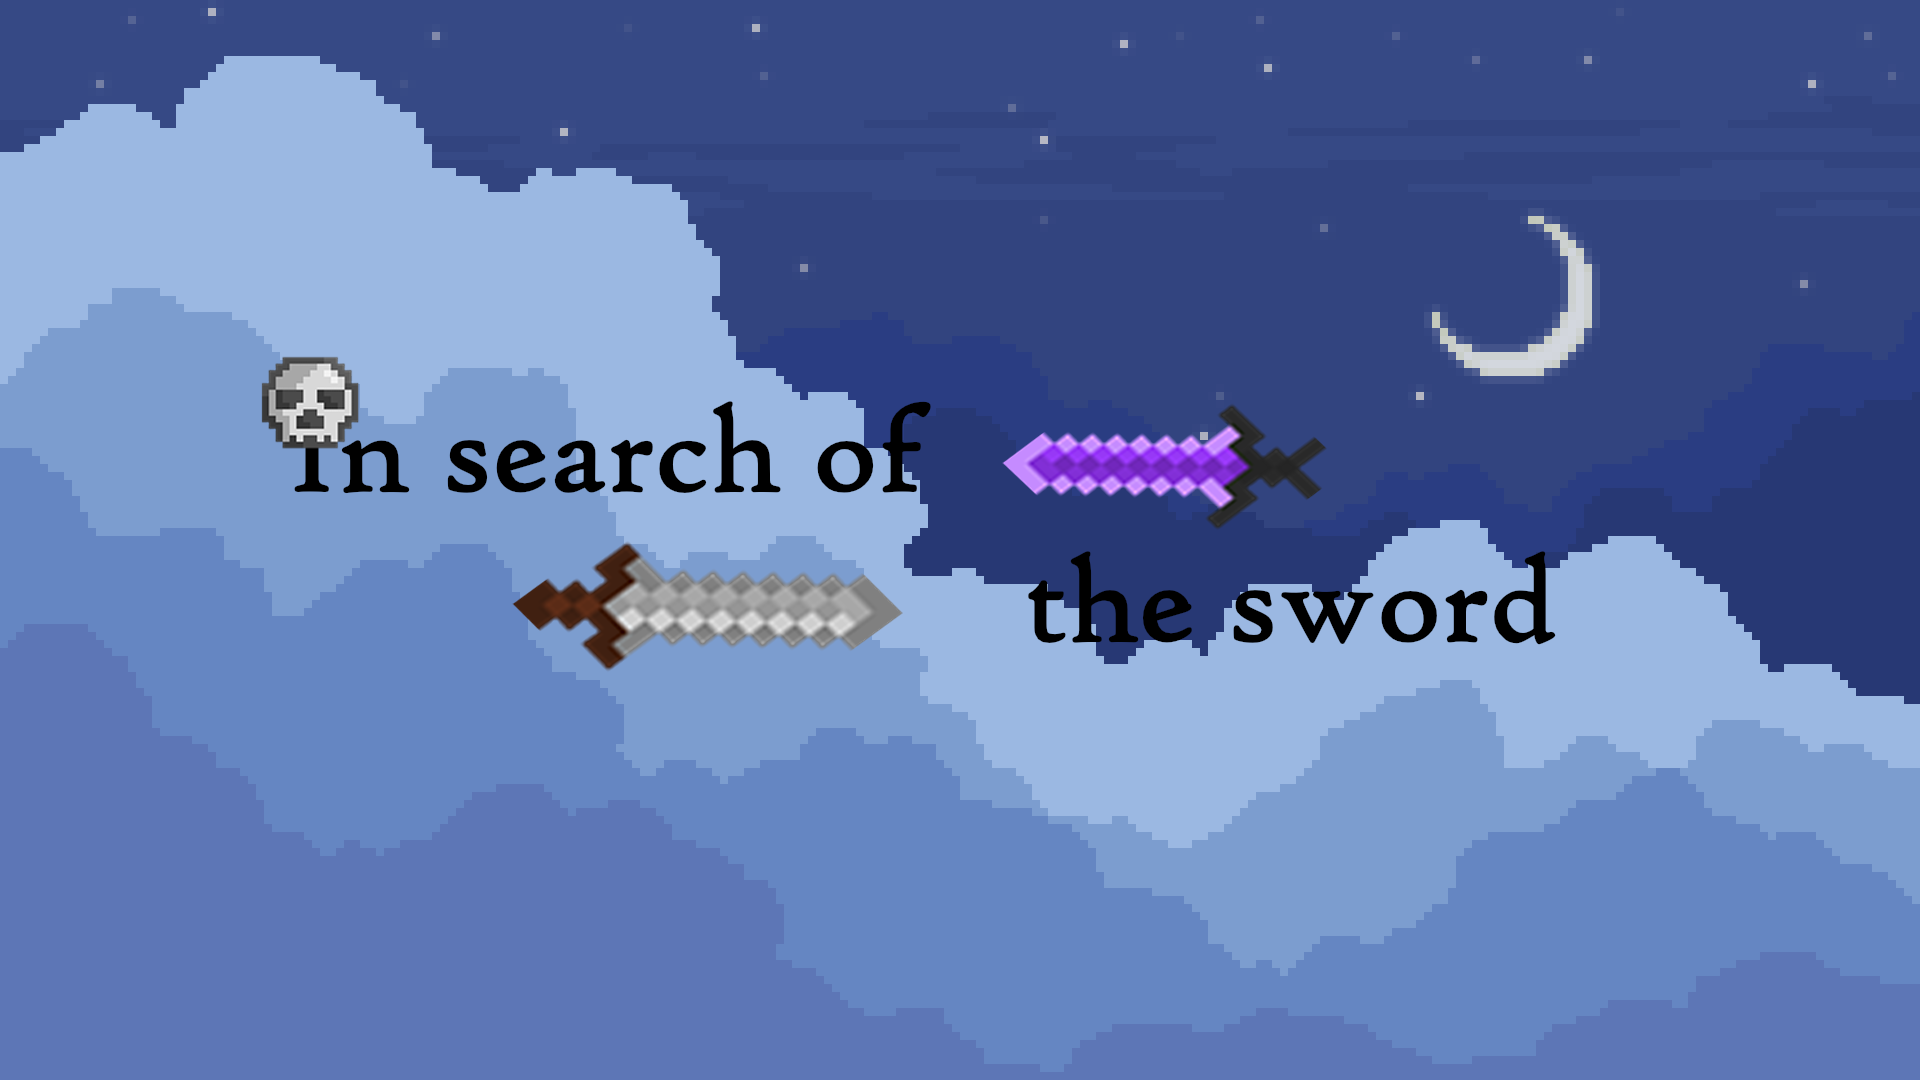 In search of the sword